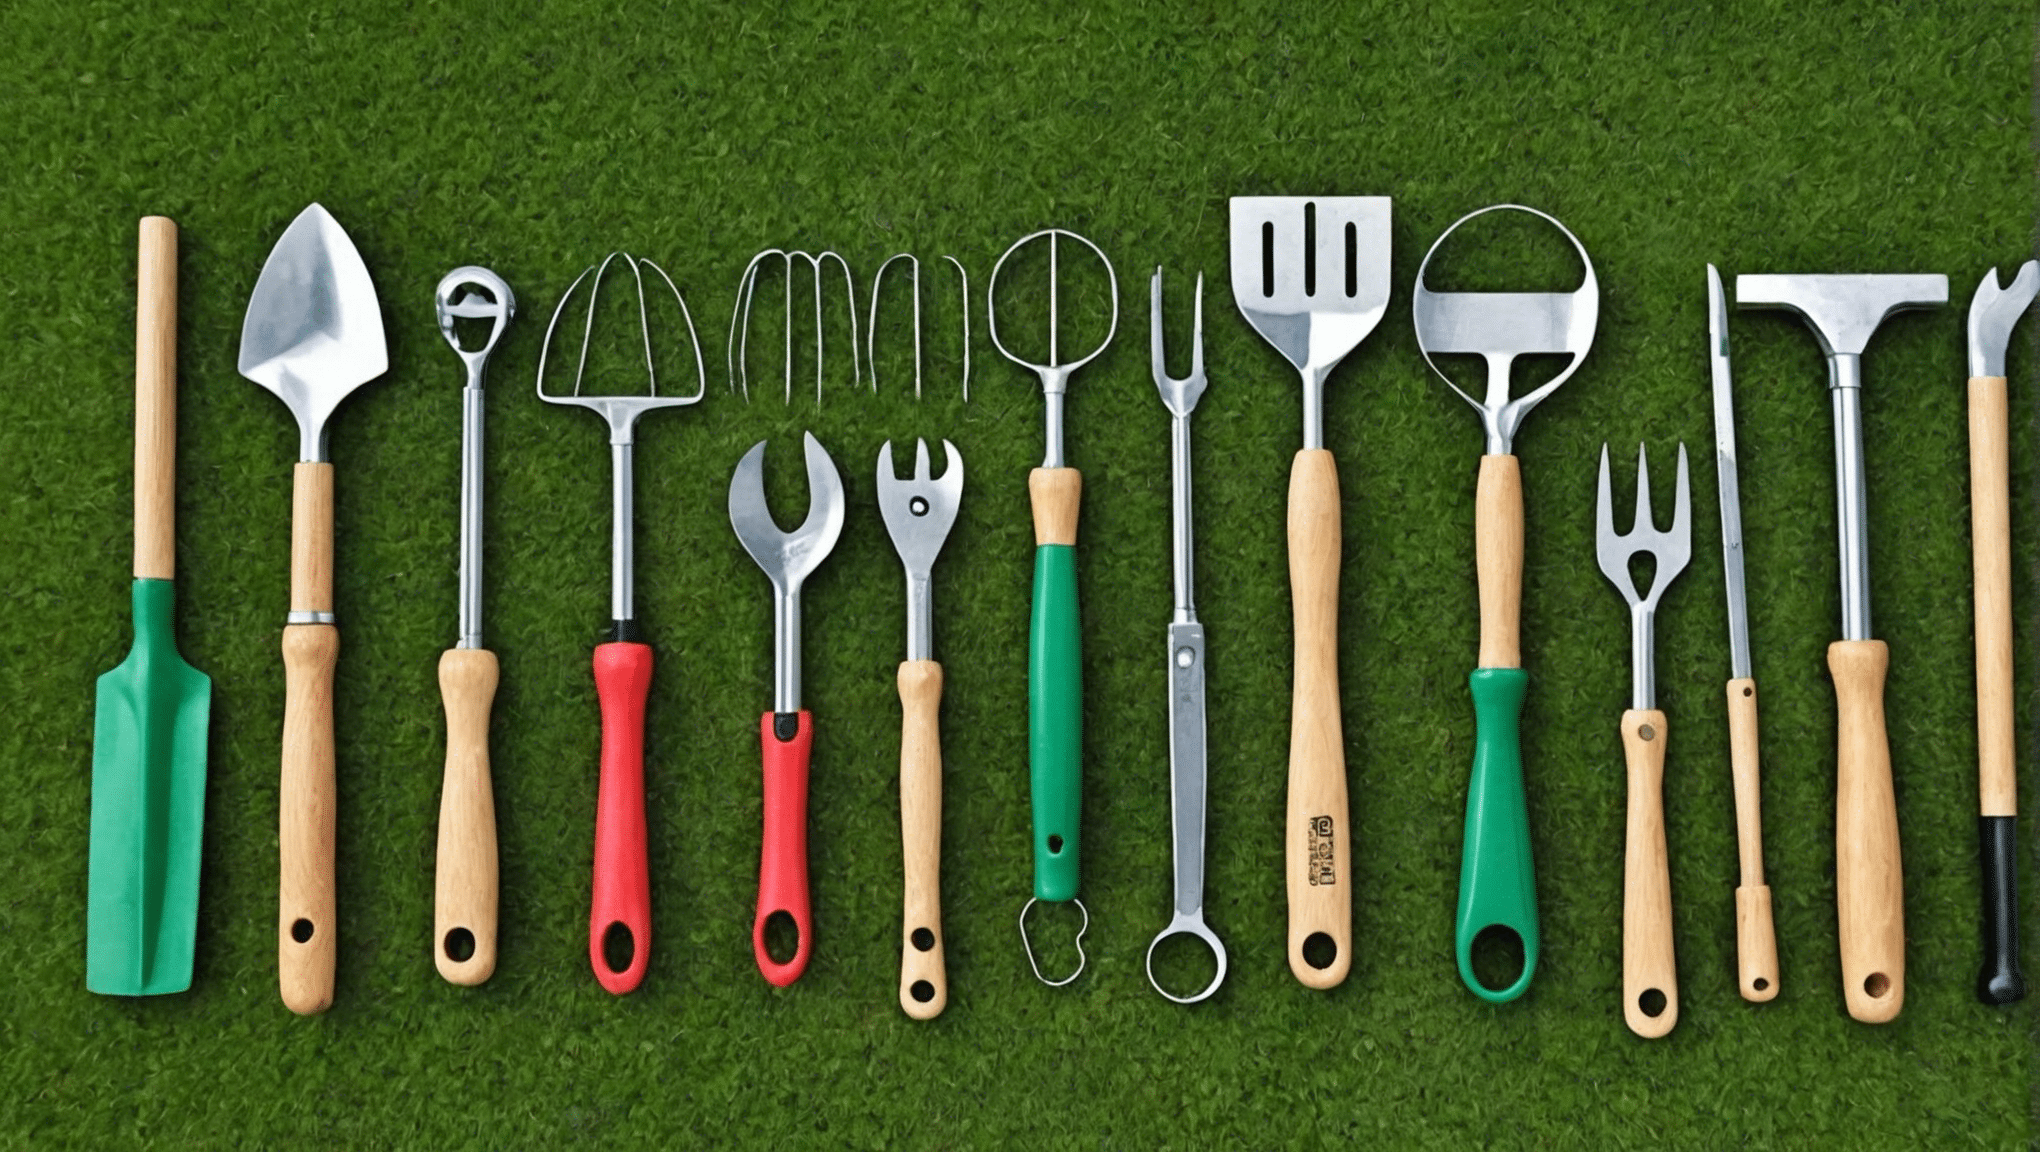 discover the essential gardening tools and their names for a thriving garden. find out which tools are must-haves for your gardening needs.